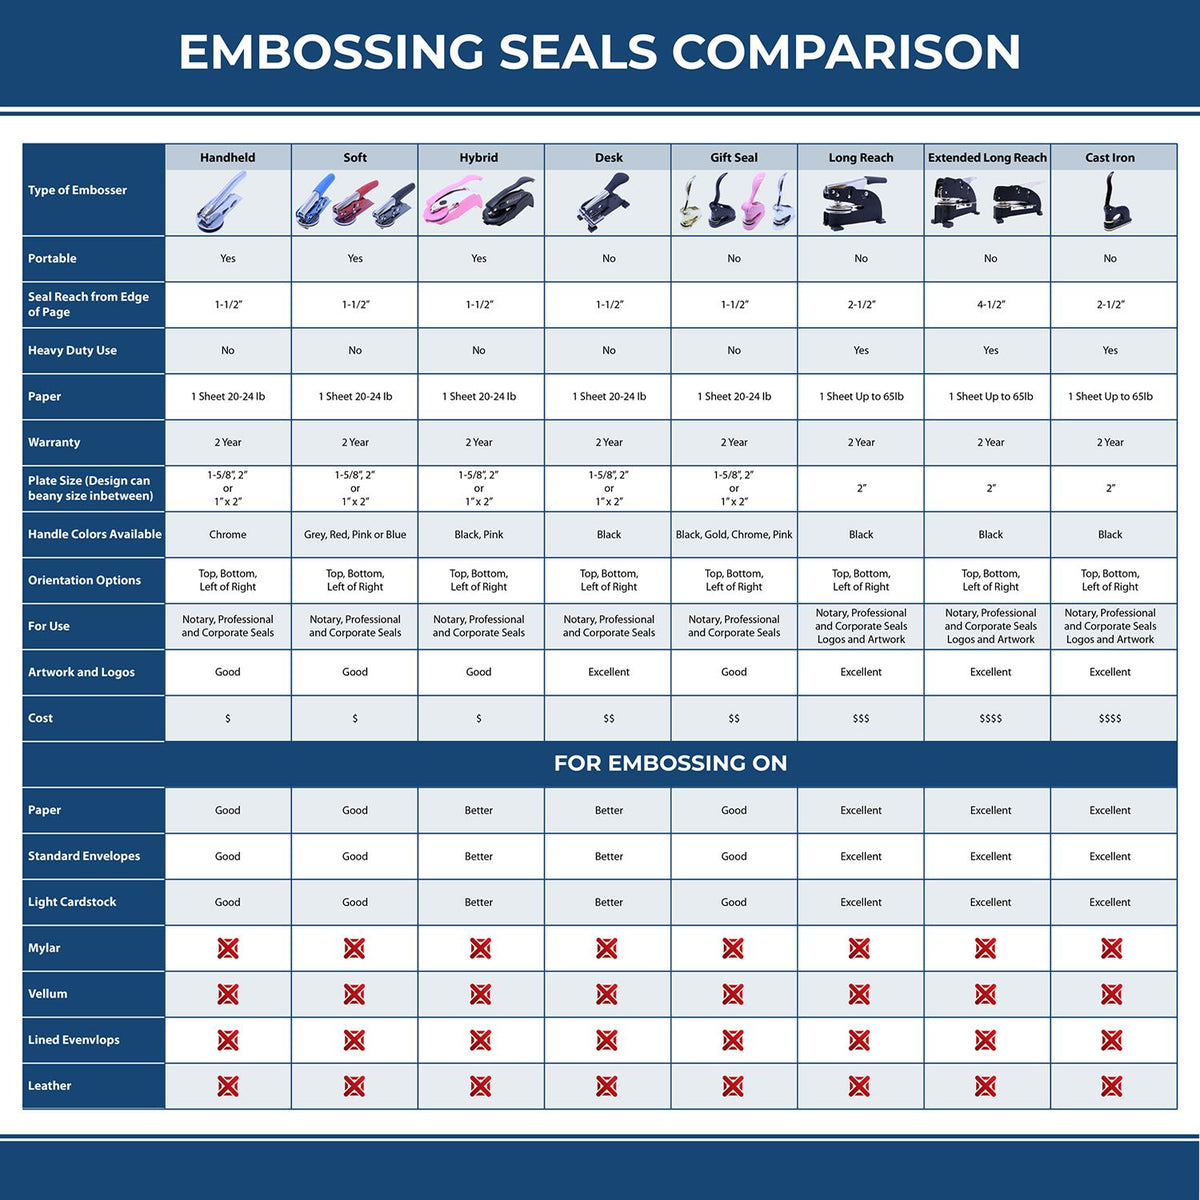 A comparison chart for the different types of mount models available for the Hybrid New York Architect Seal